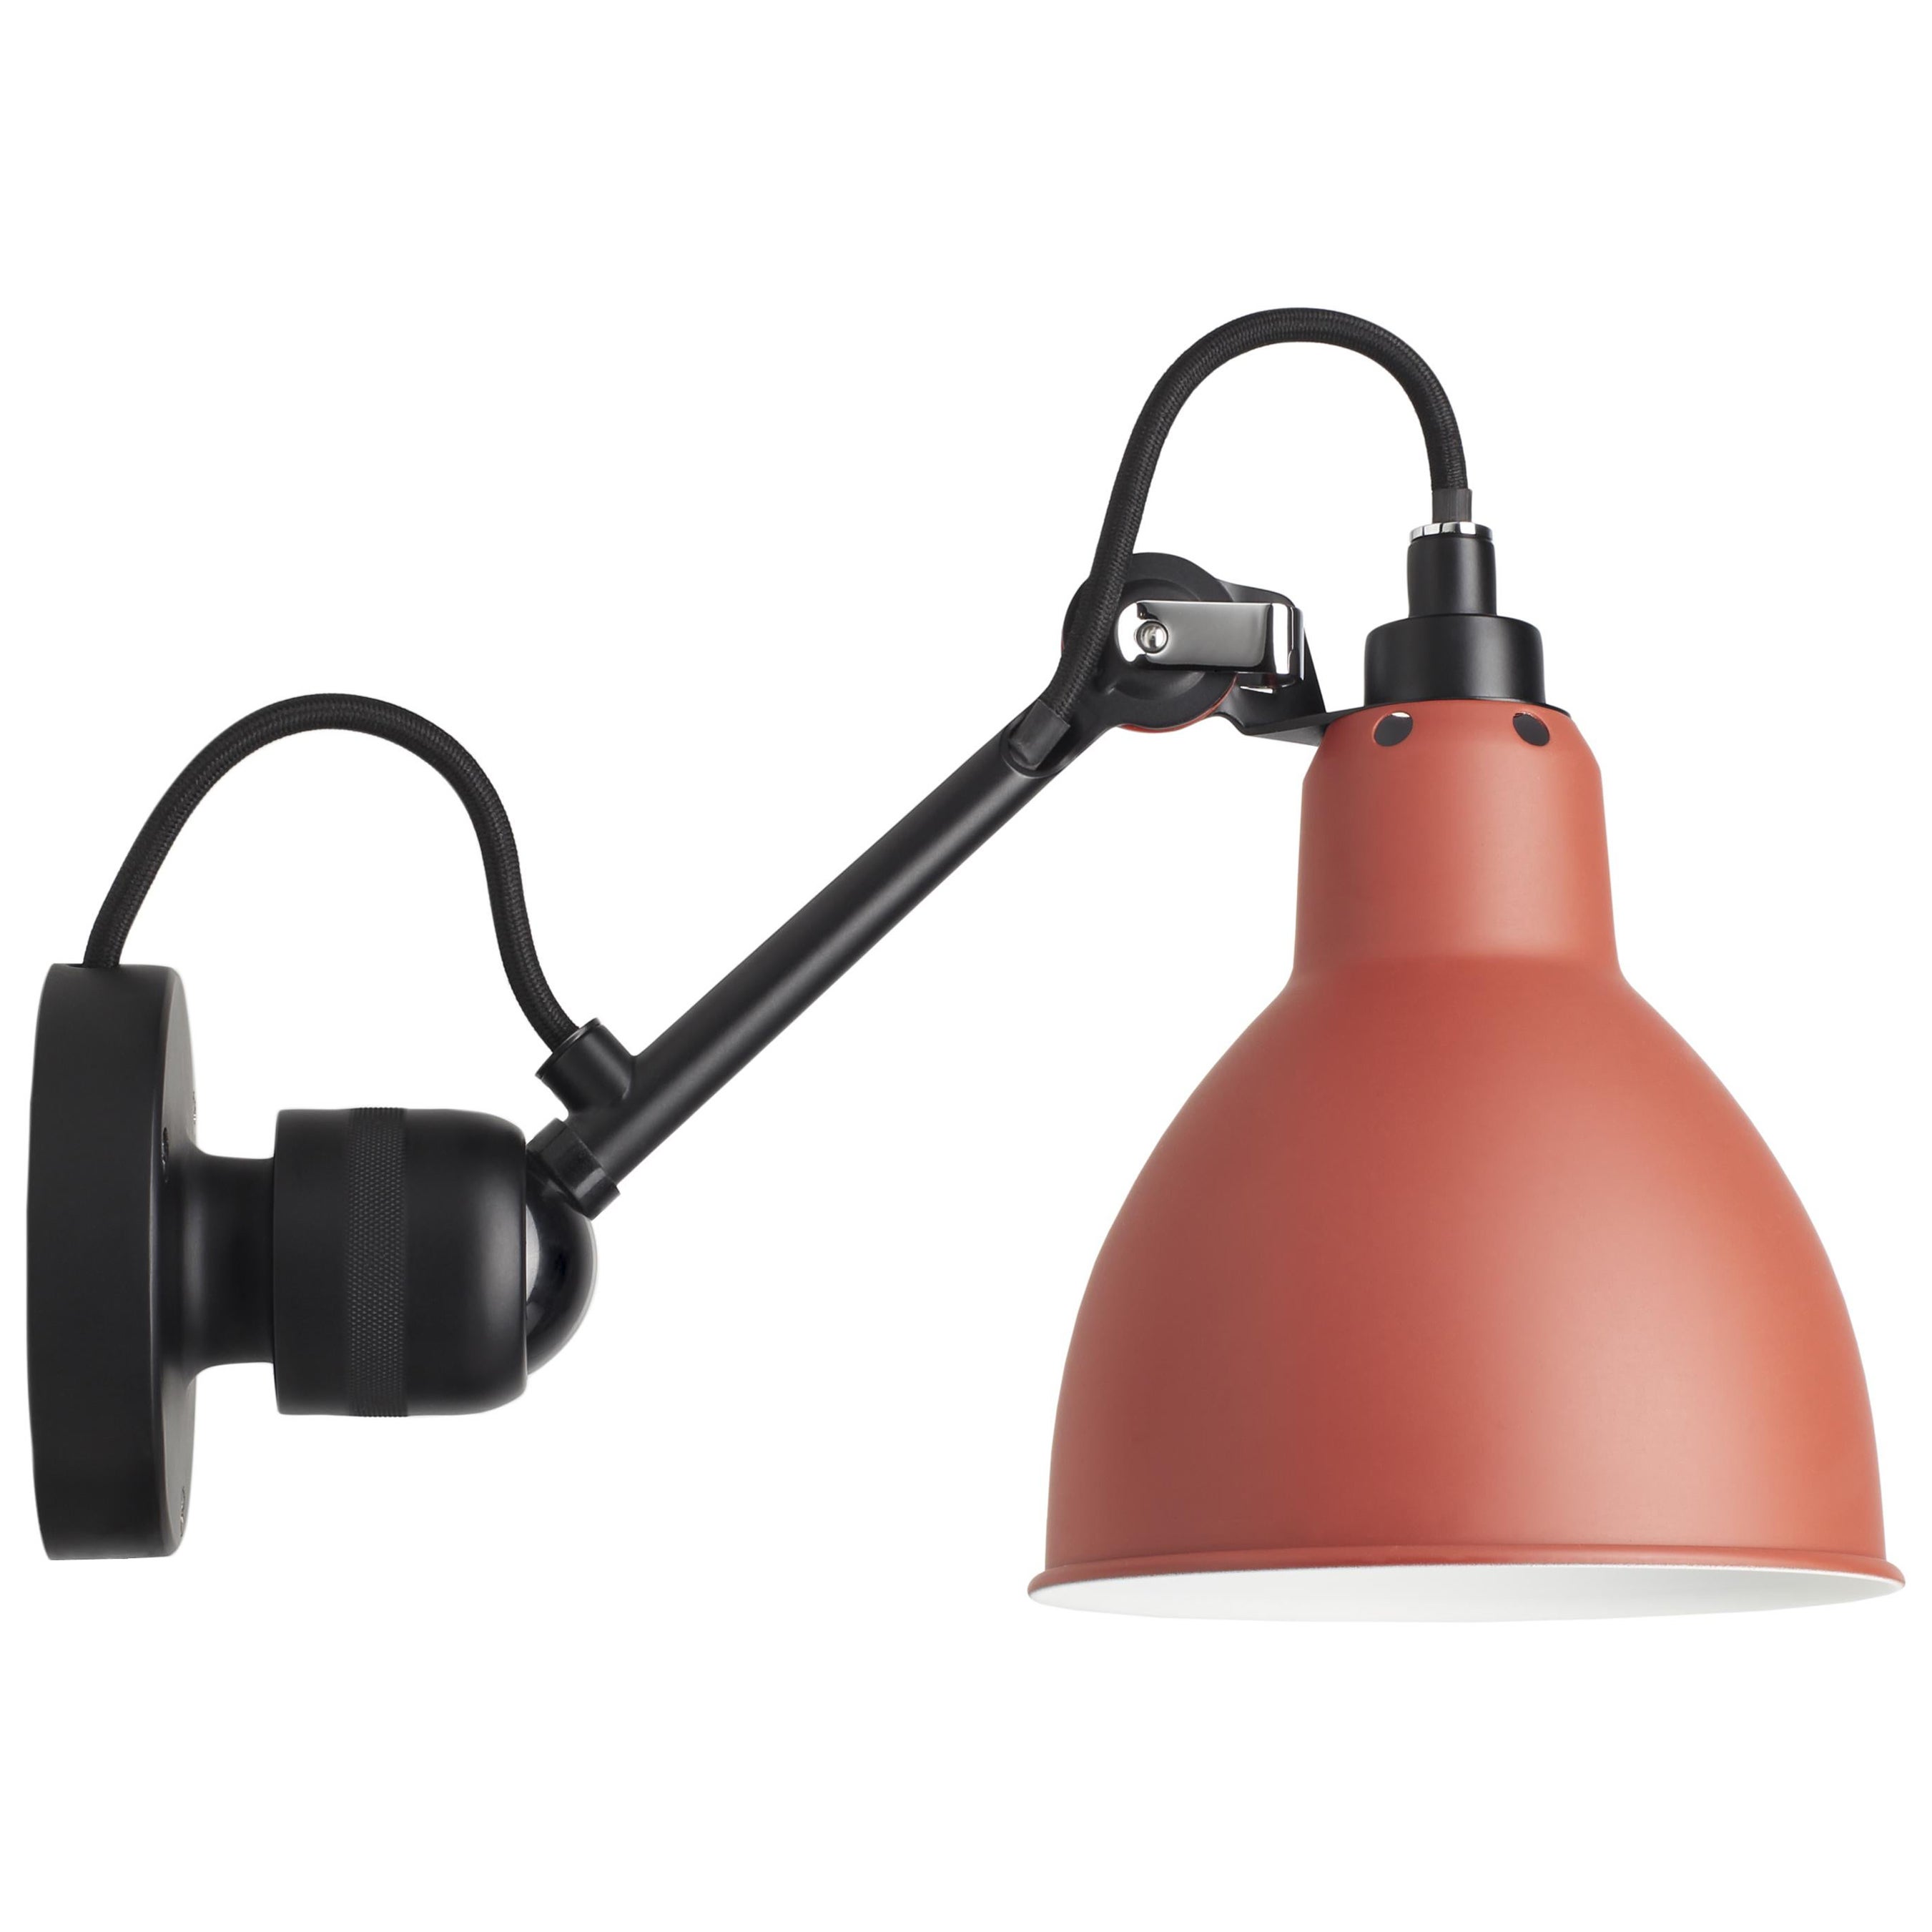 DCW Editions La Lampe Gras N°304 CA Wall Lamp in Black Arm and Red Shade